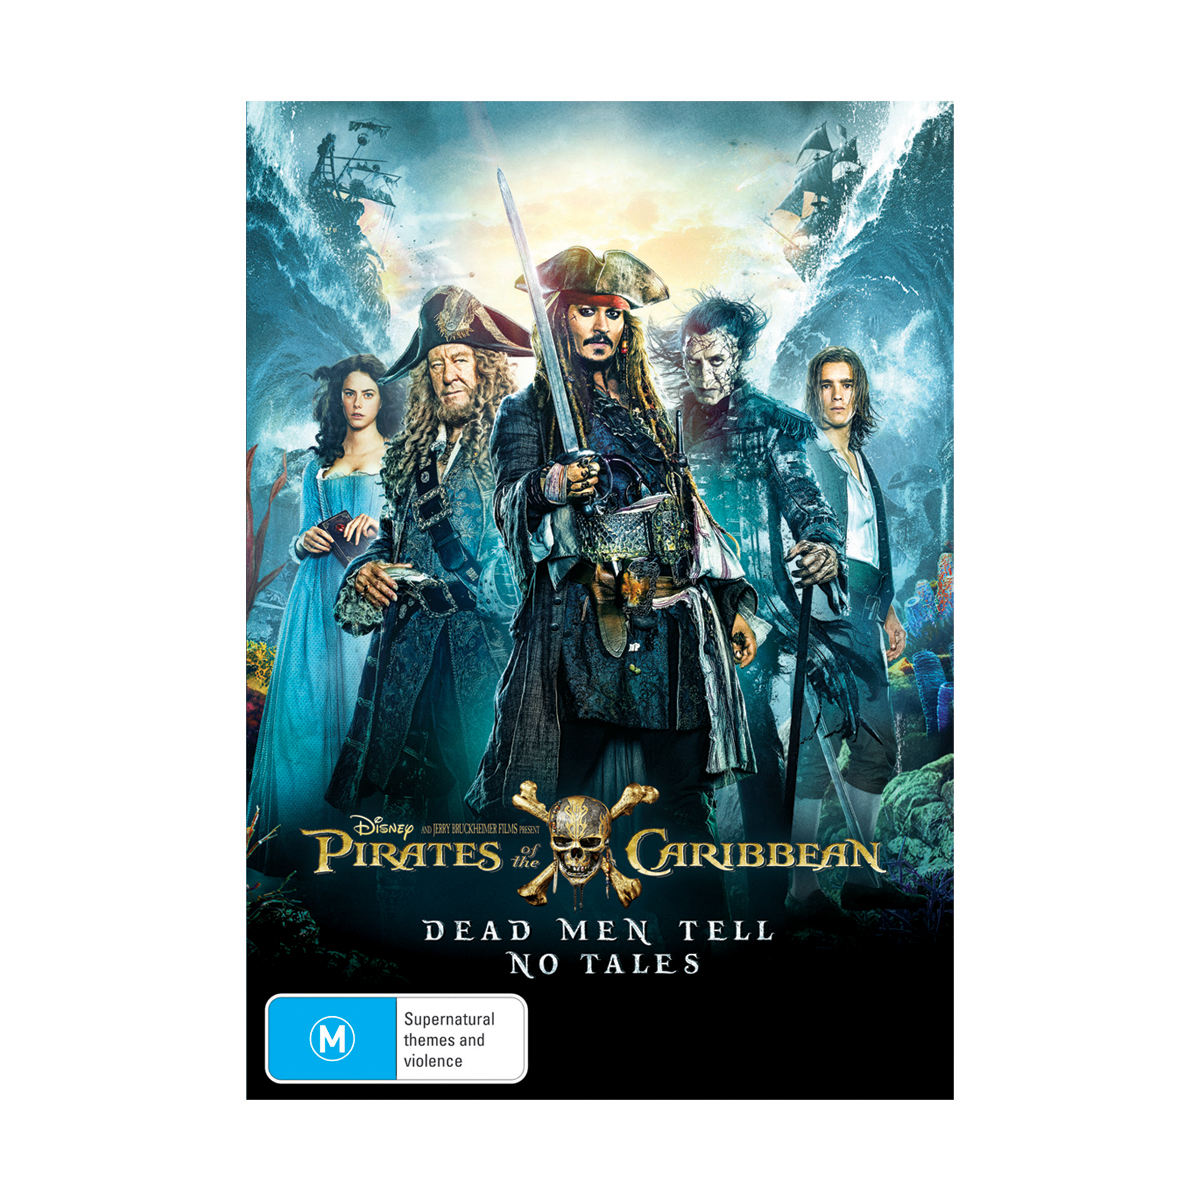 Pirates Of The Caribbean 5: Dead Men Tell No Tales - DVD